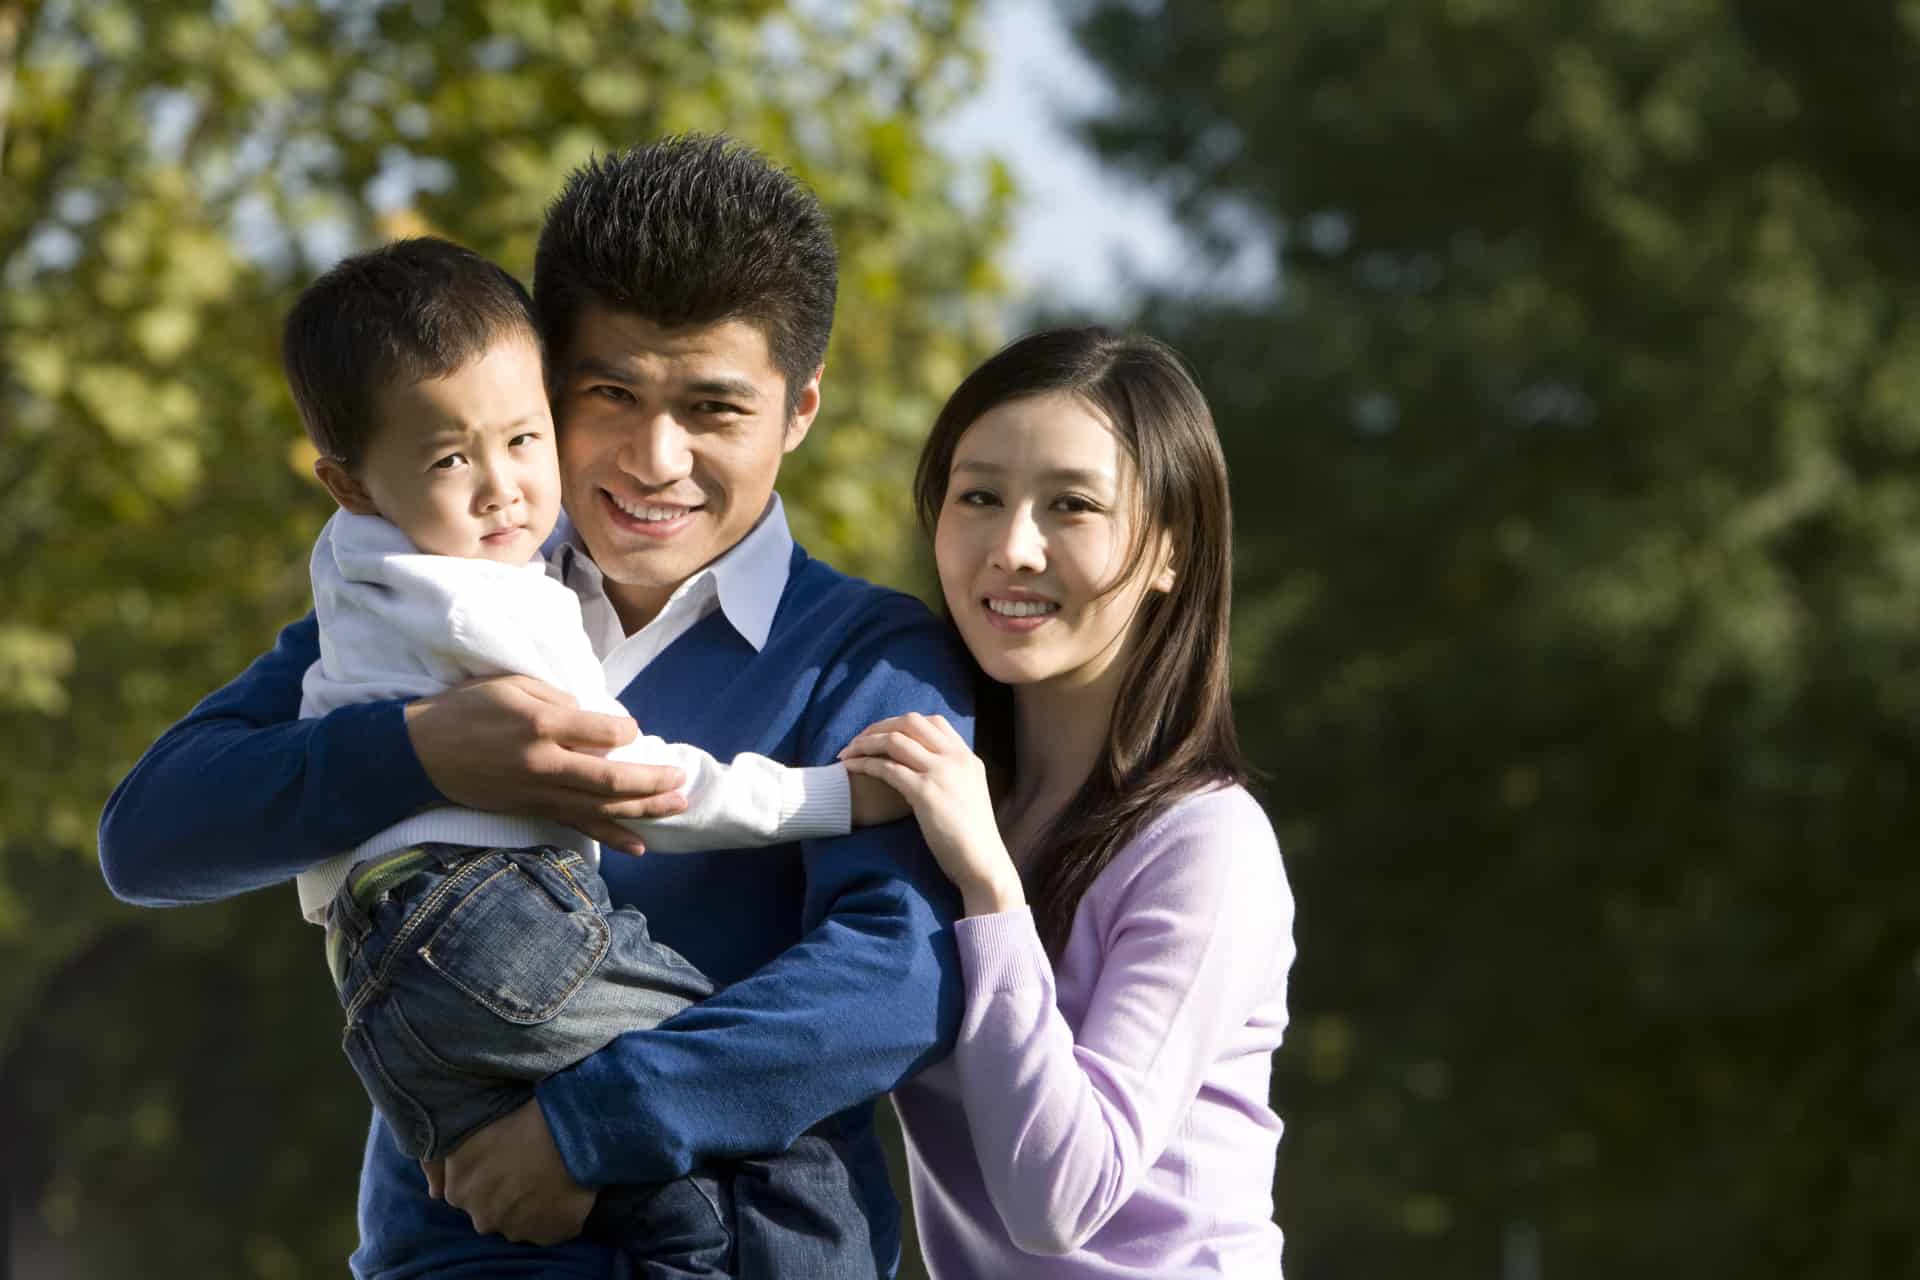 A man and woman stand outdoors, smiling at the camera, with Eugene Soo holding a young child in his arms. Trees are visible in the background.